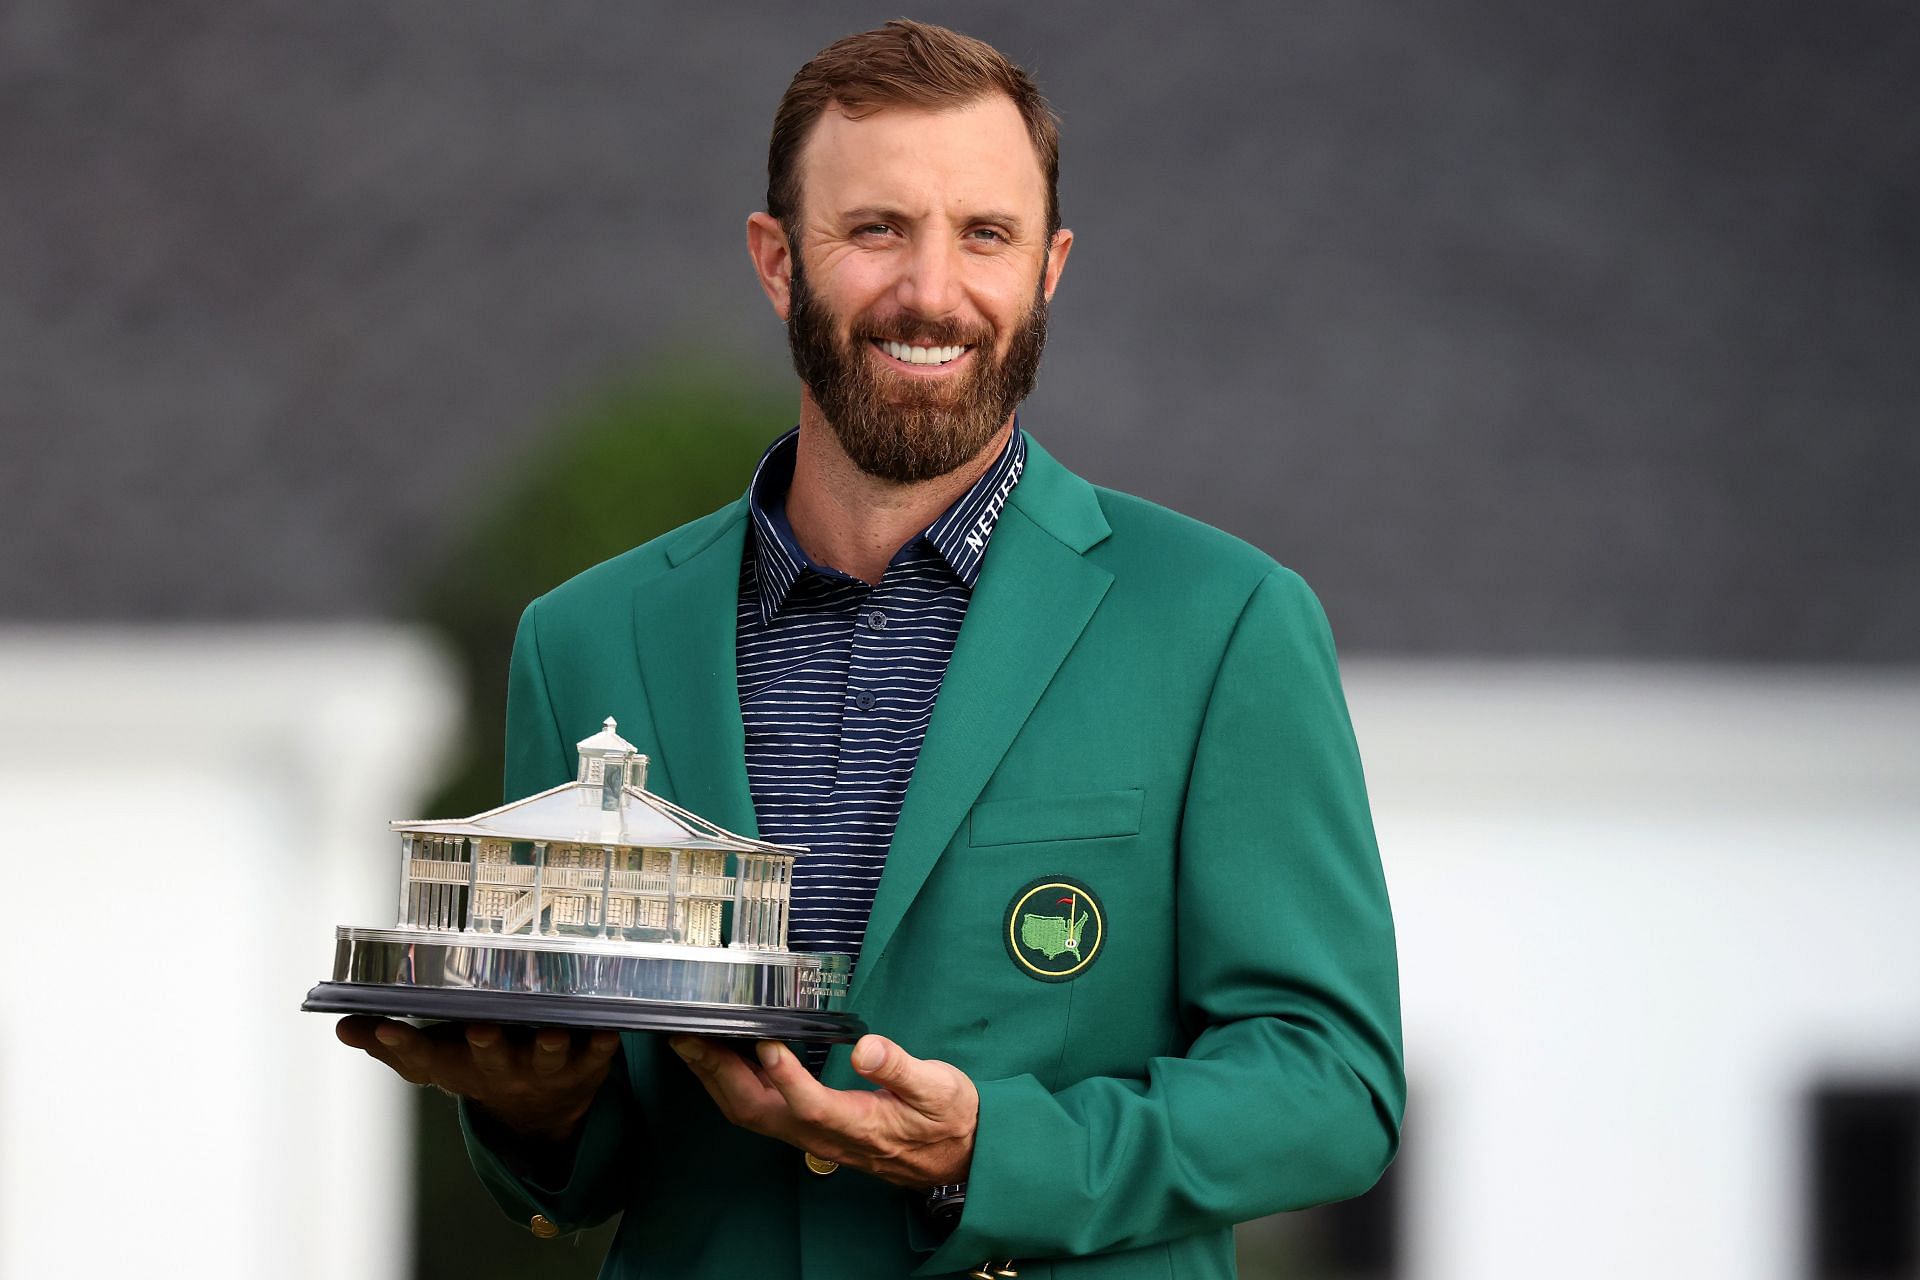 Cameron Smith to Dustin Johnson: LIV golfers eligible for The Masters 2023